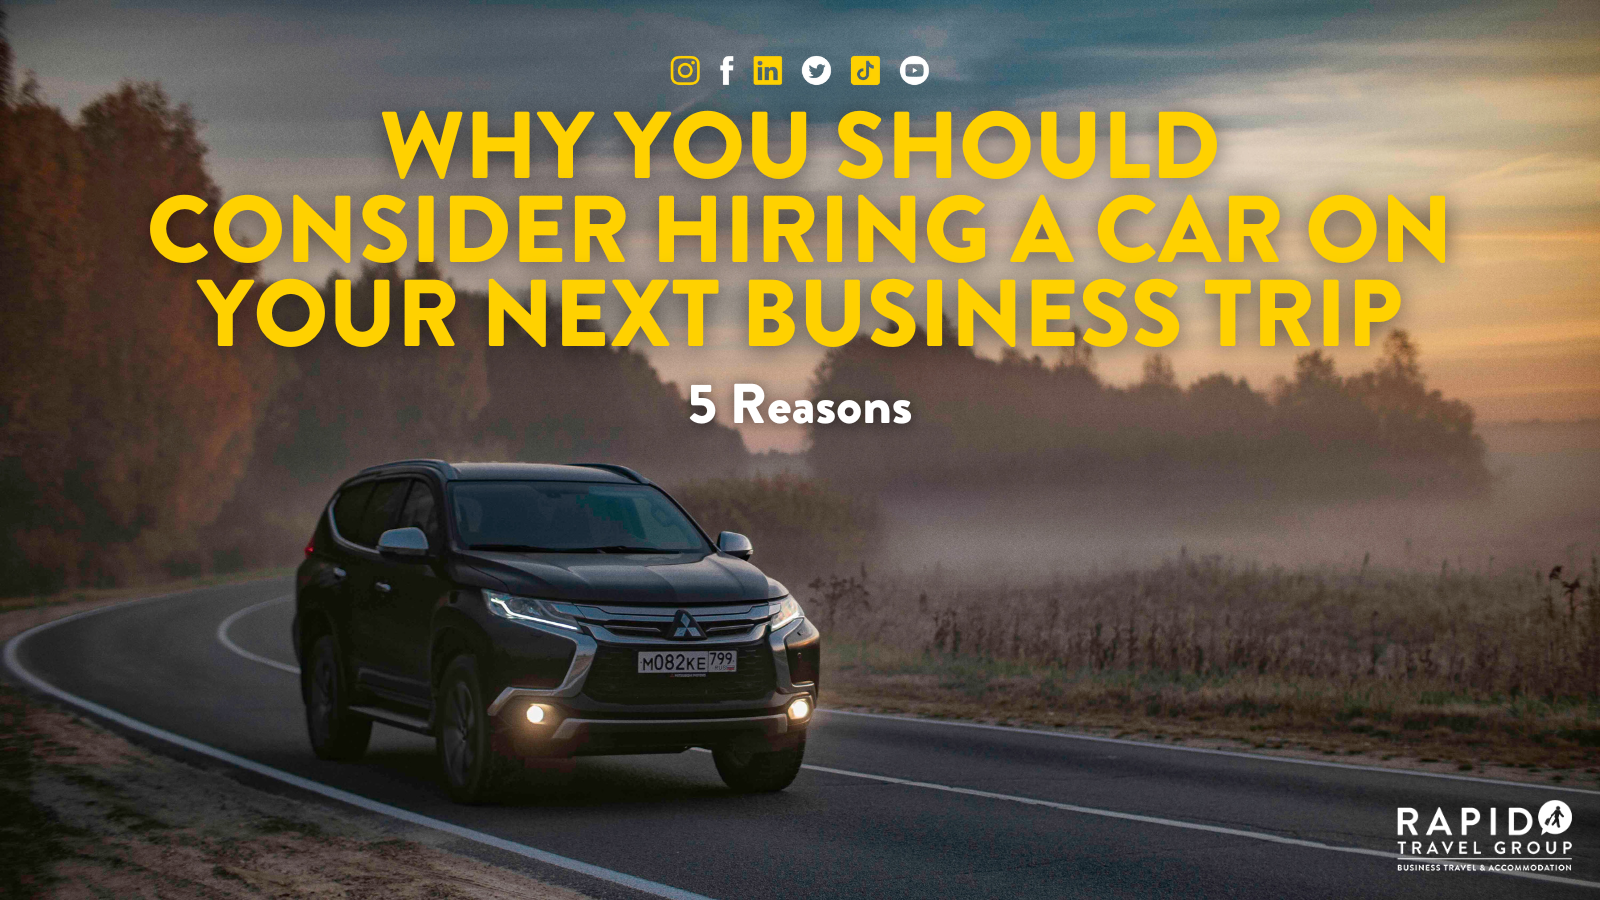 Why you should consider hiring a car on your next business trip